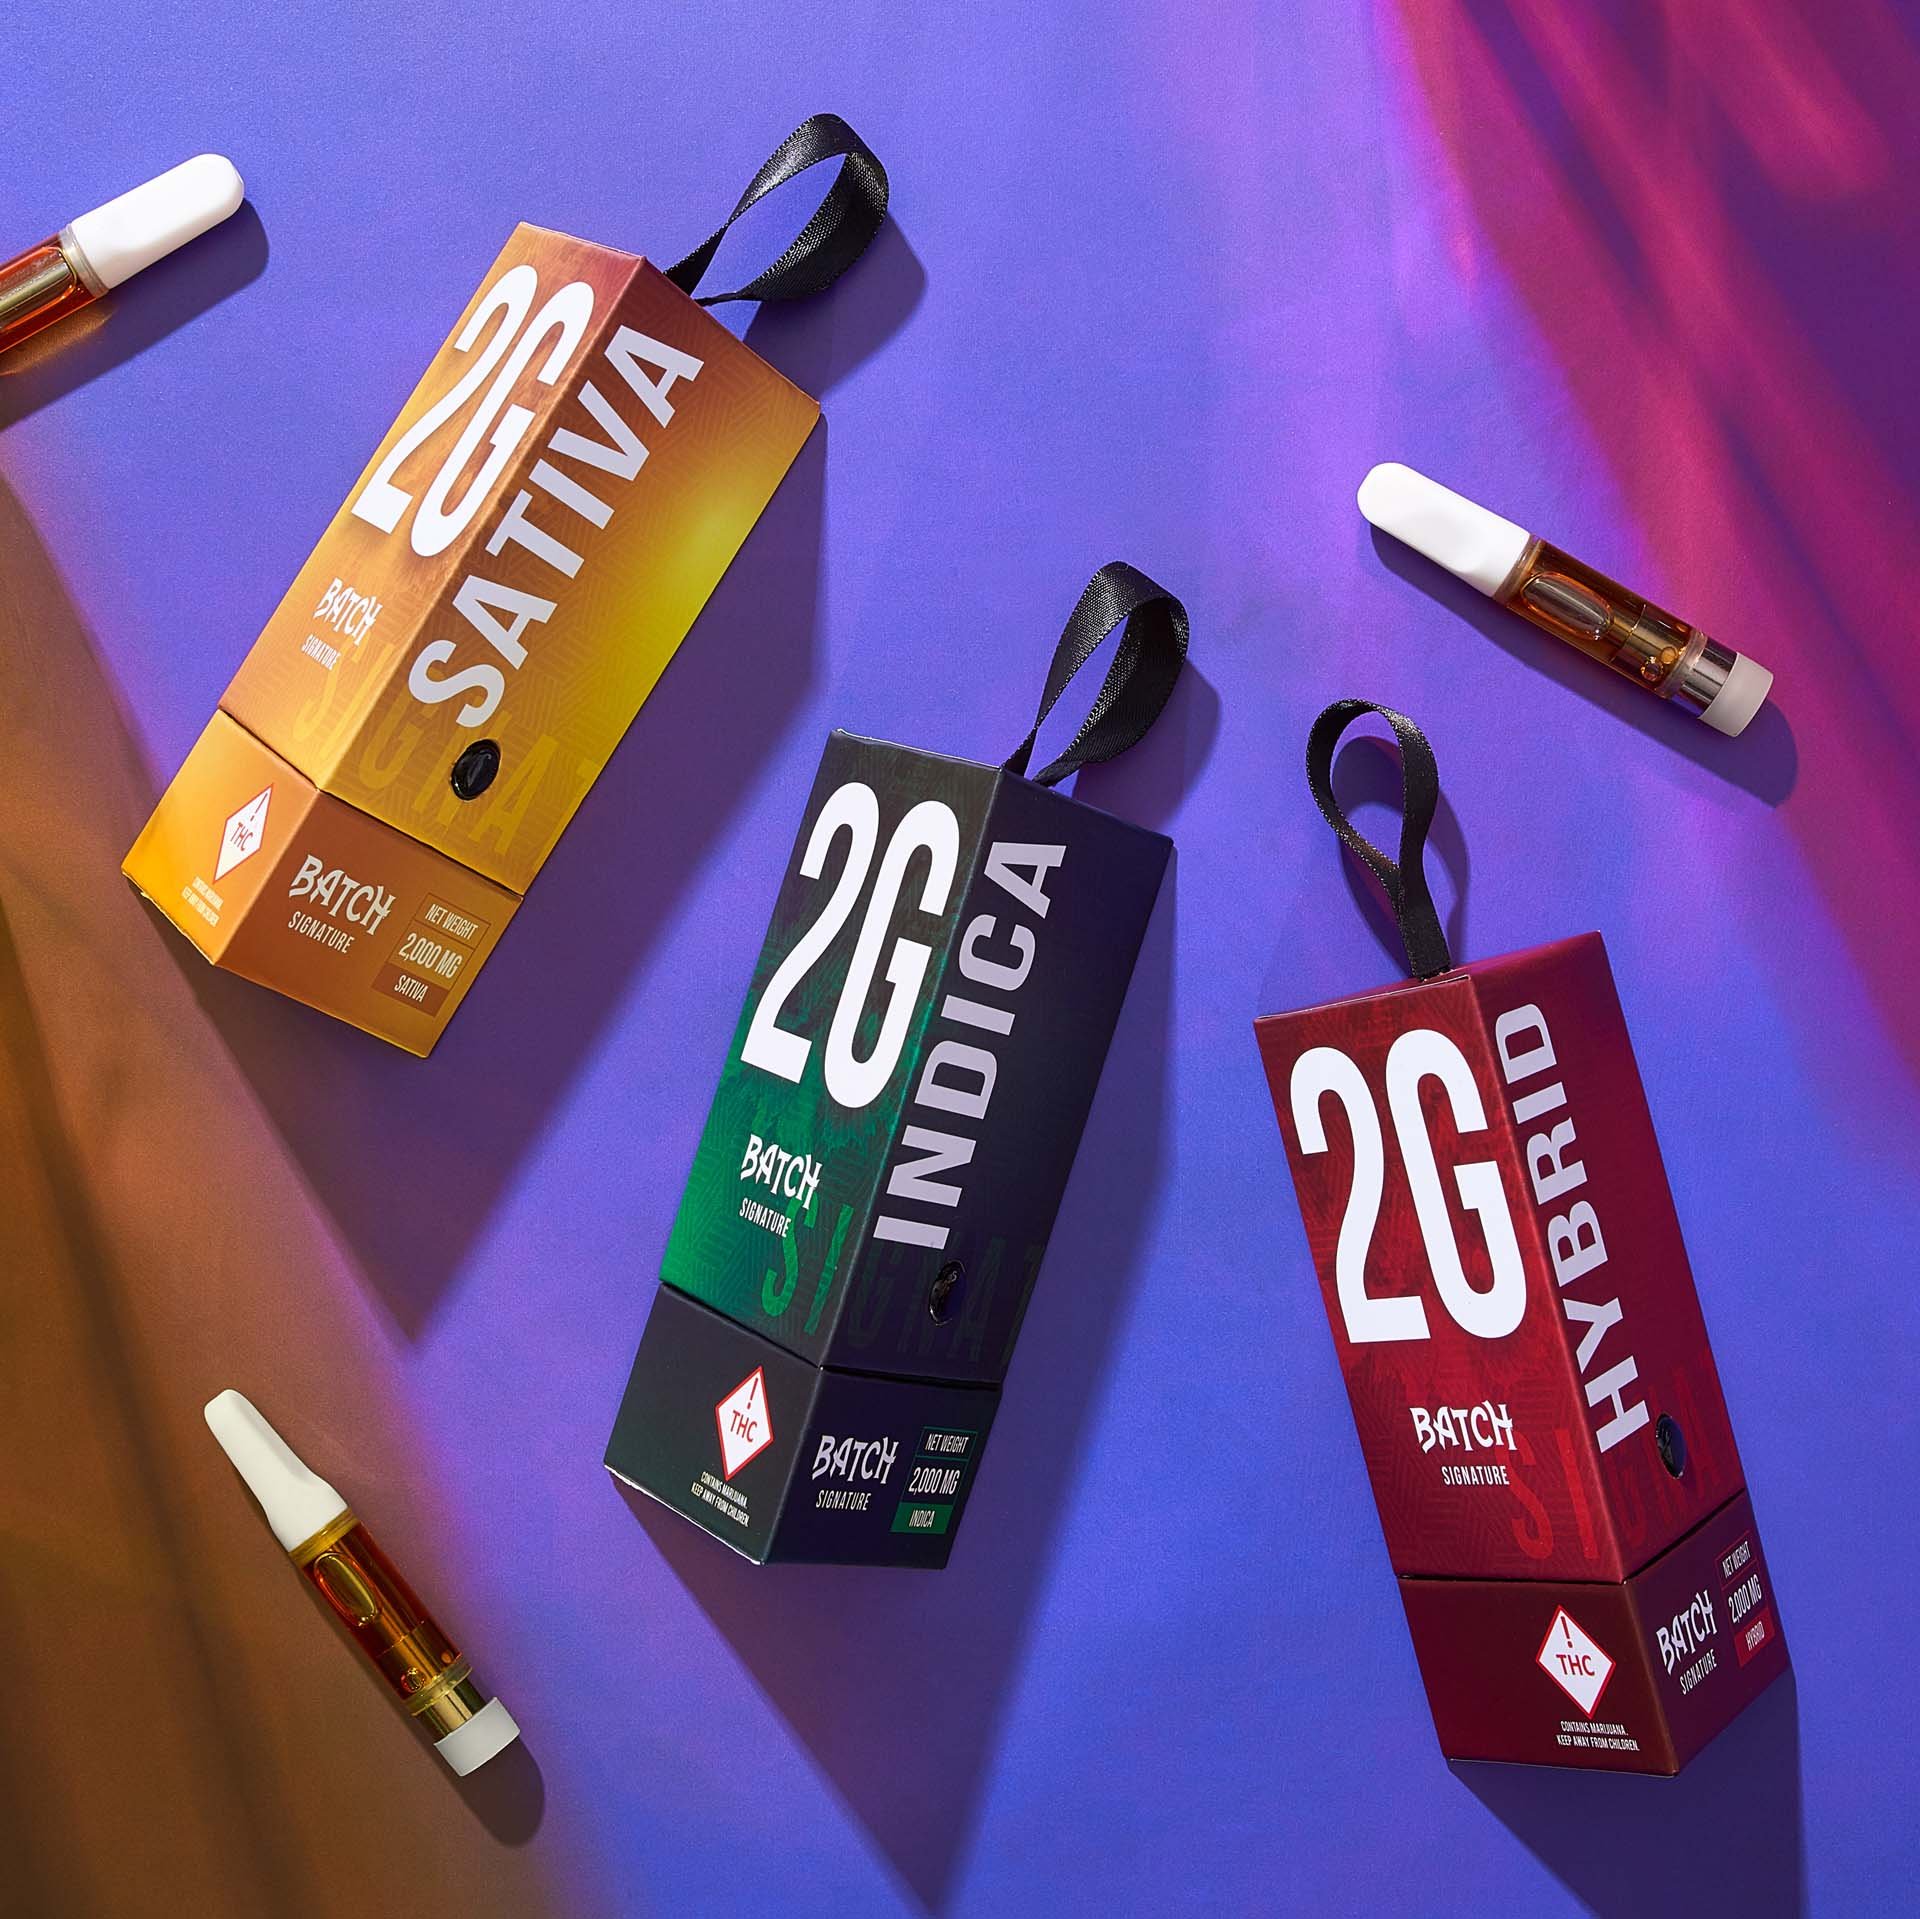 RXD Co - Batch Signature vape carts & packaging x3, overhead with colored gels_.jpg